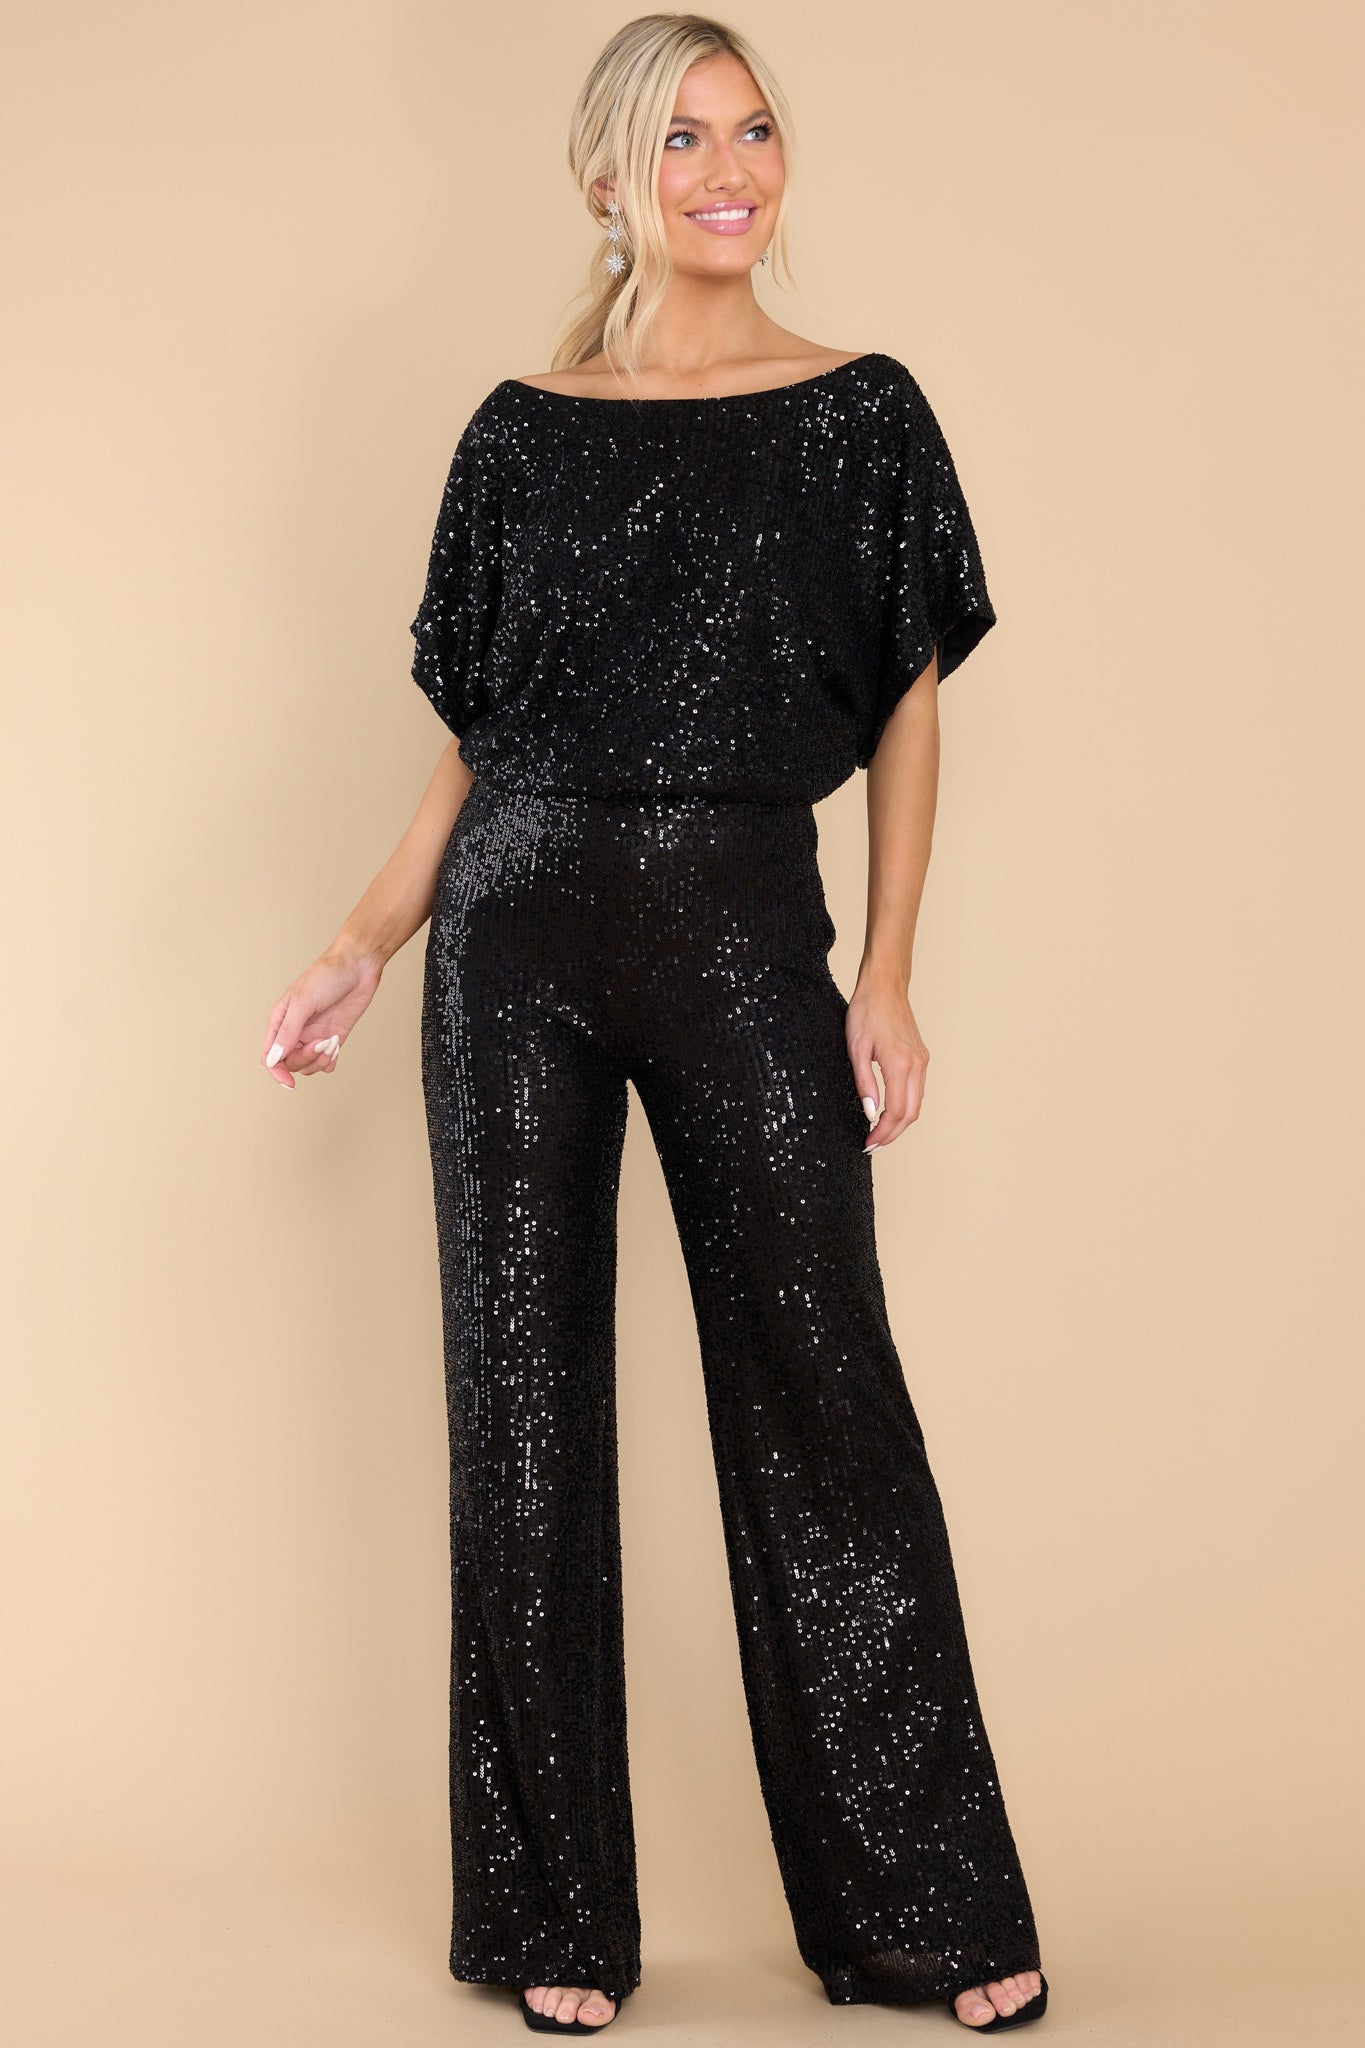 Like A Star Black Sequin Pants - Red Dress